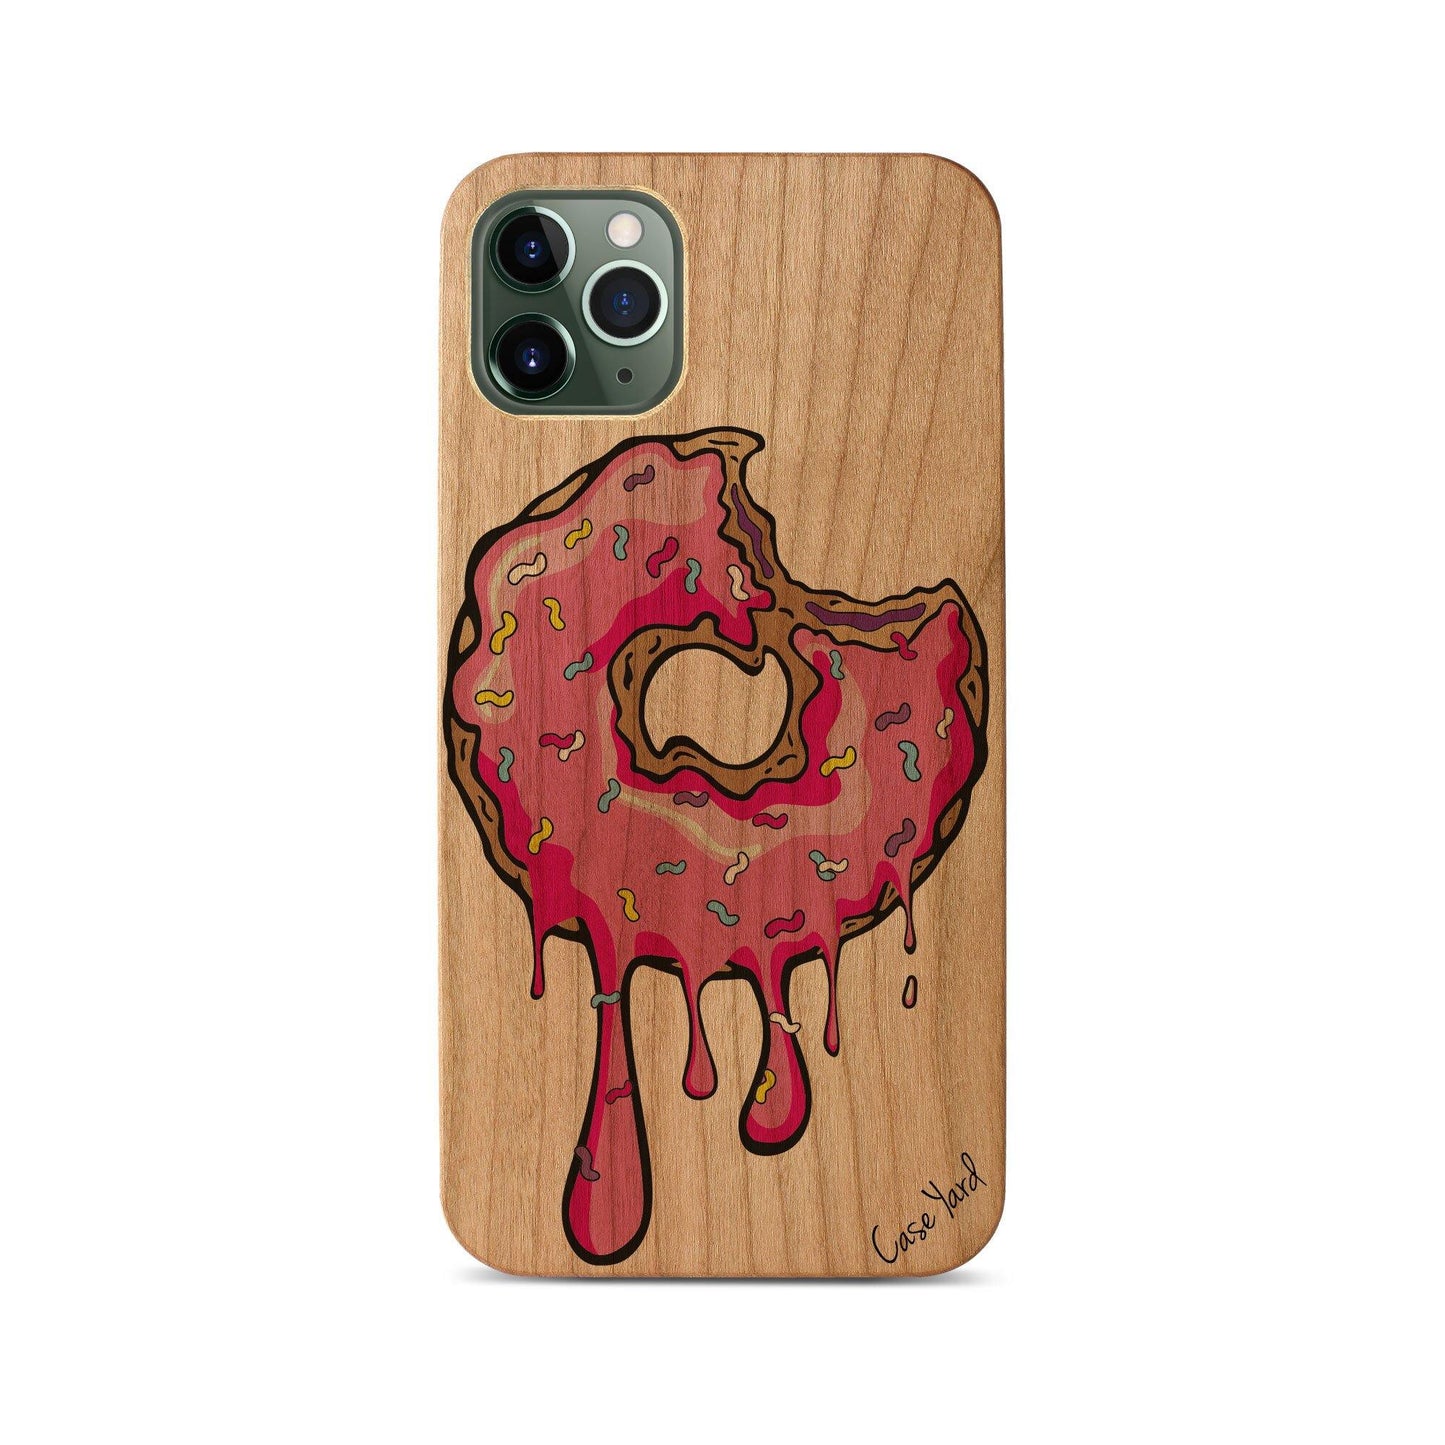 Dripping Donut UV Colored Wood - Case Yard USA